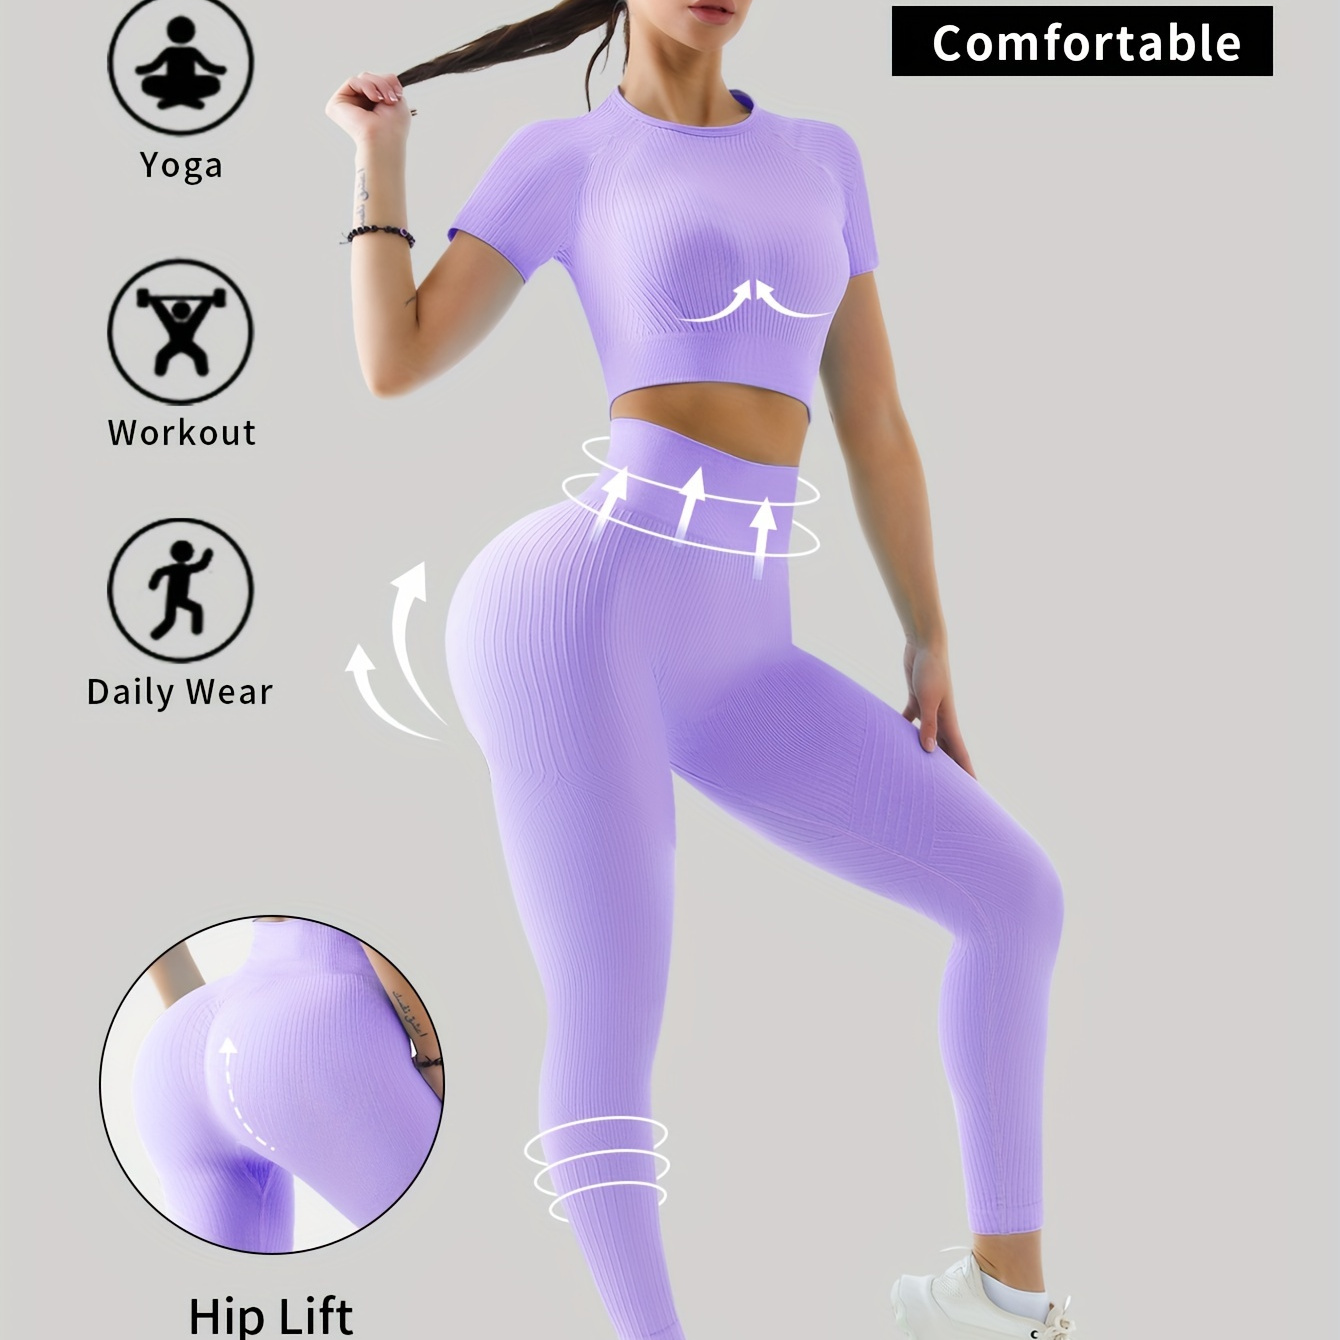 

Women's High Waist Hip Lift Yoga Pants And Stretchy Crop Top Set, Sporty, Comfortable Fits For Workout And Daily Use